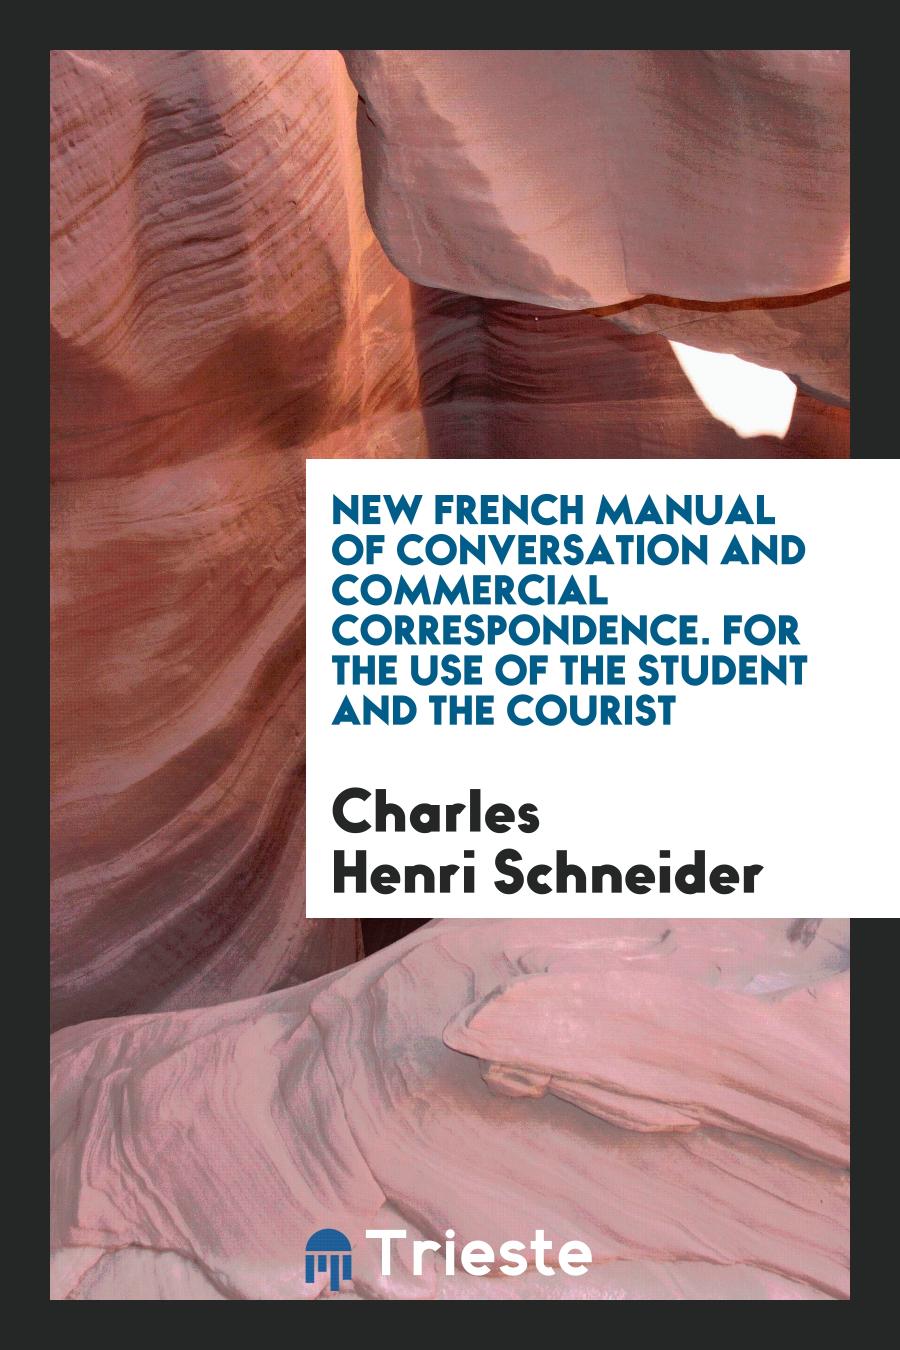 New French Manual of Conversation and Commercial Correspondence. For the Use of the Student and the Courist